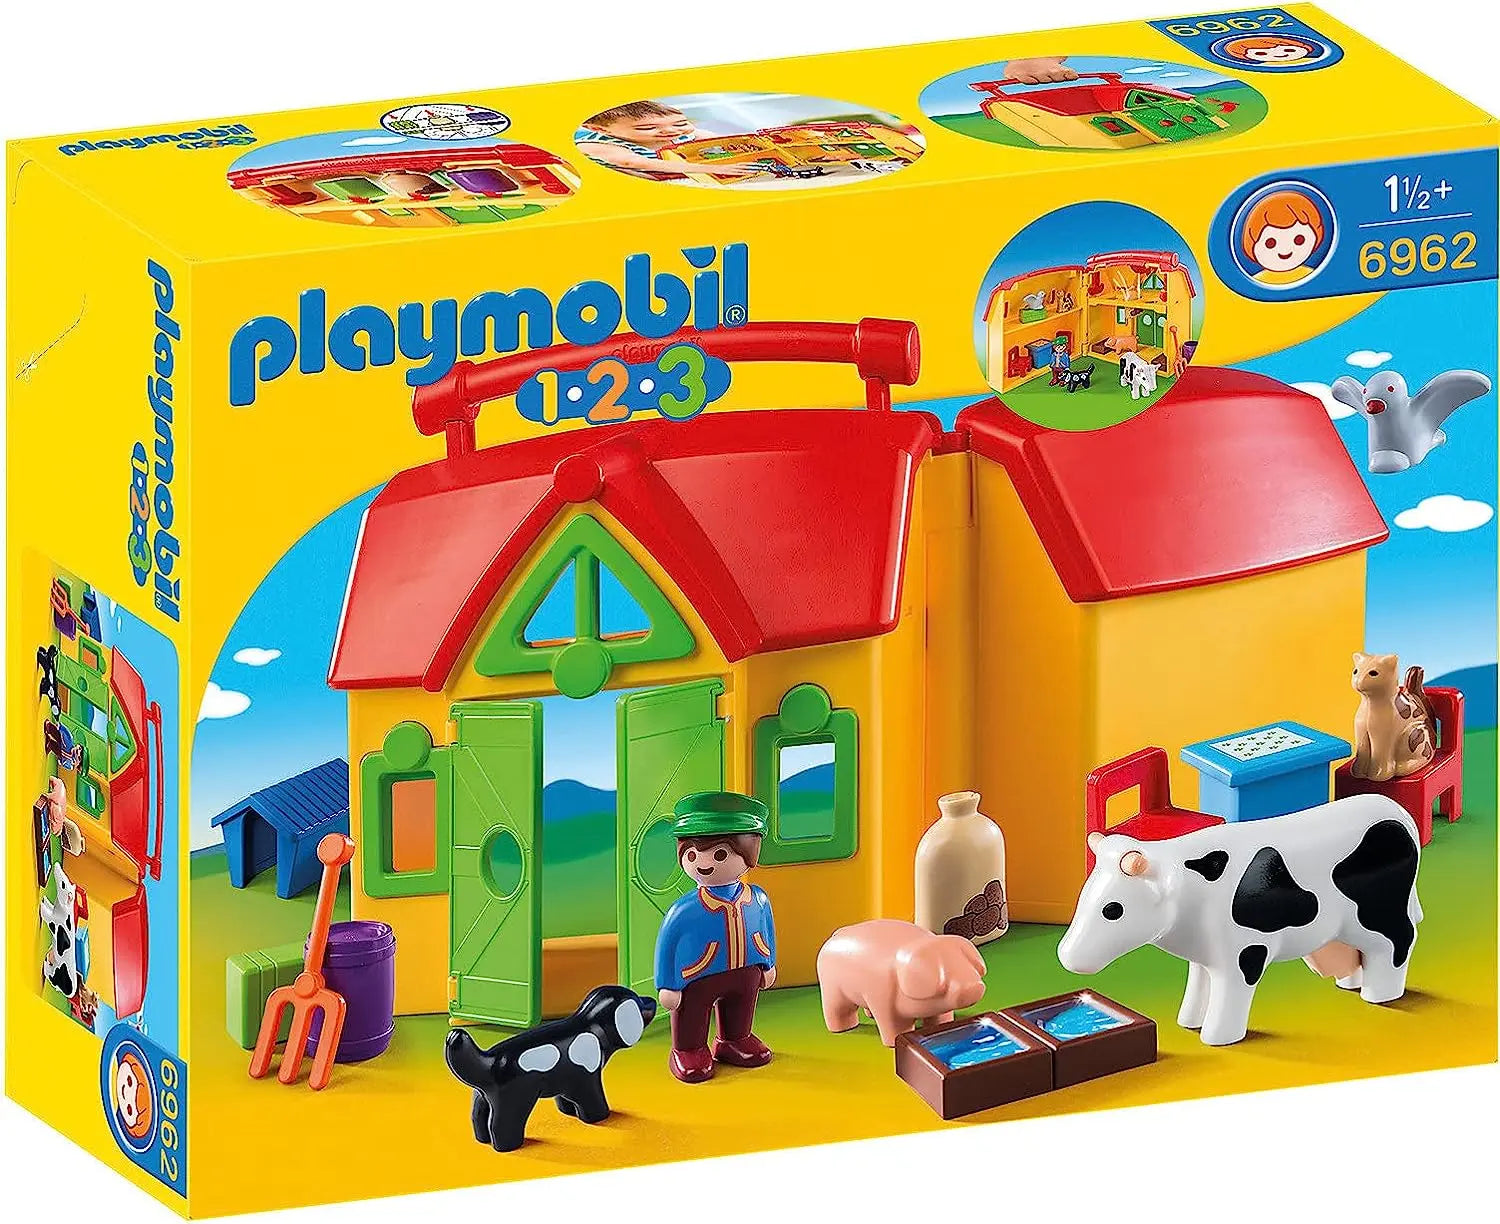 6962 Ferme transportable avec animaux Playmobil 1.2.3 - TECIN HOLDING playmobil  animaux sauvages